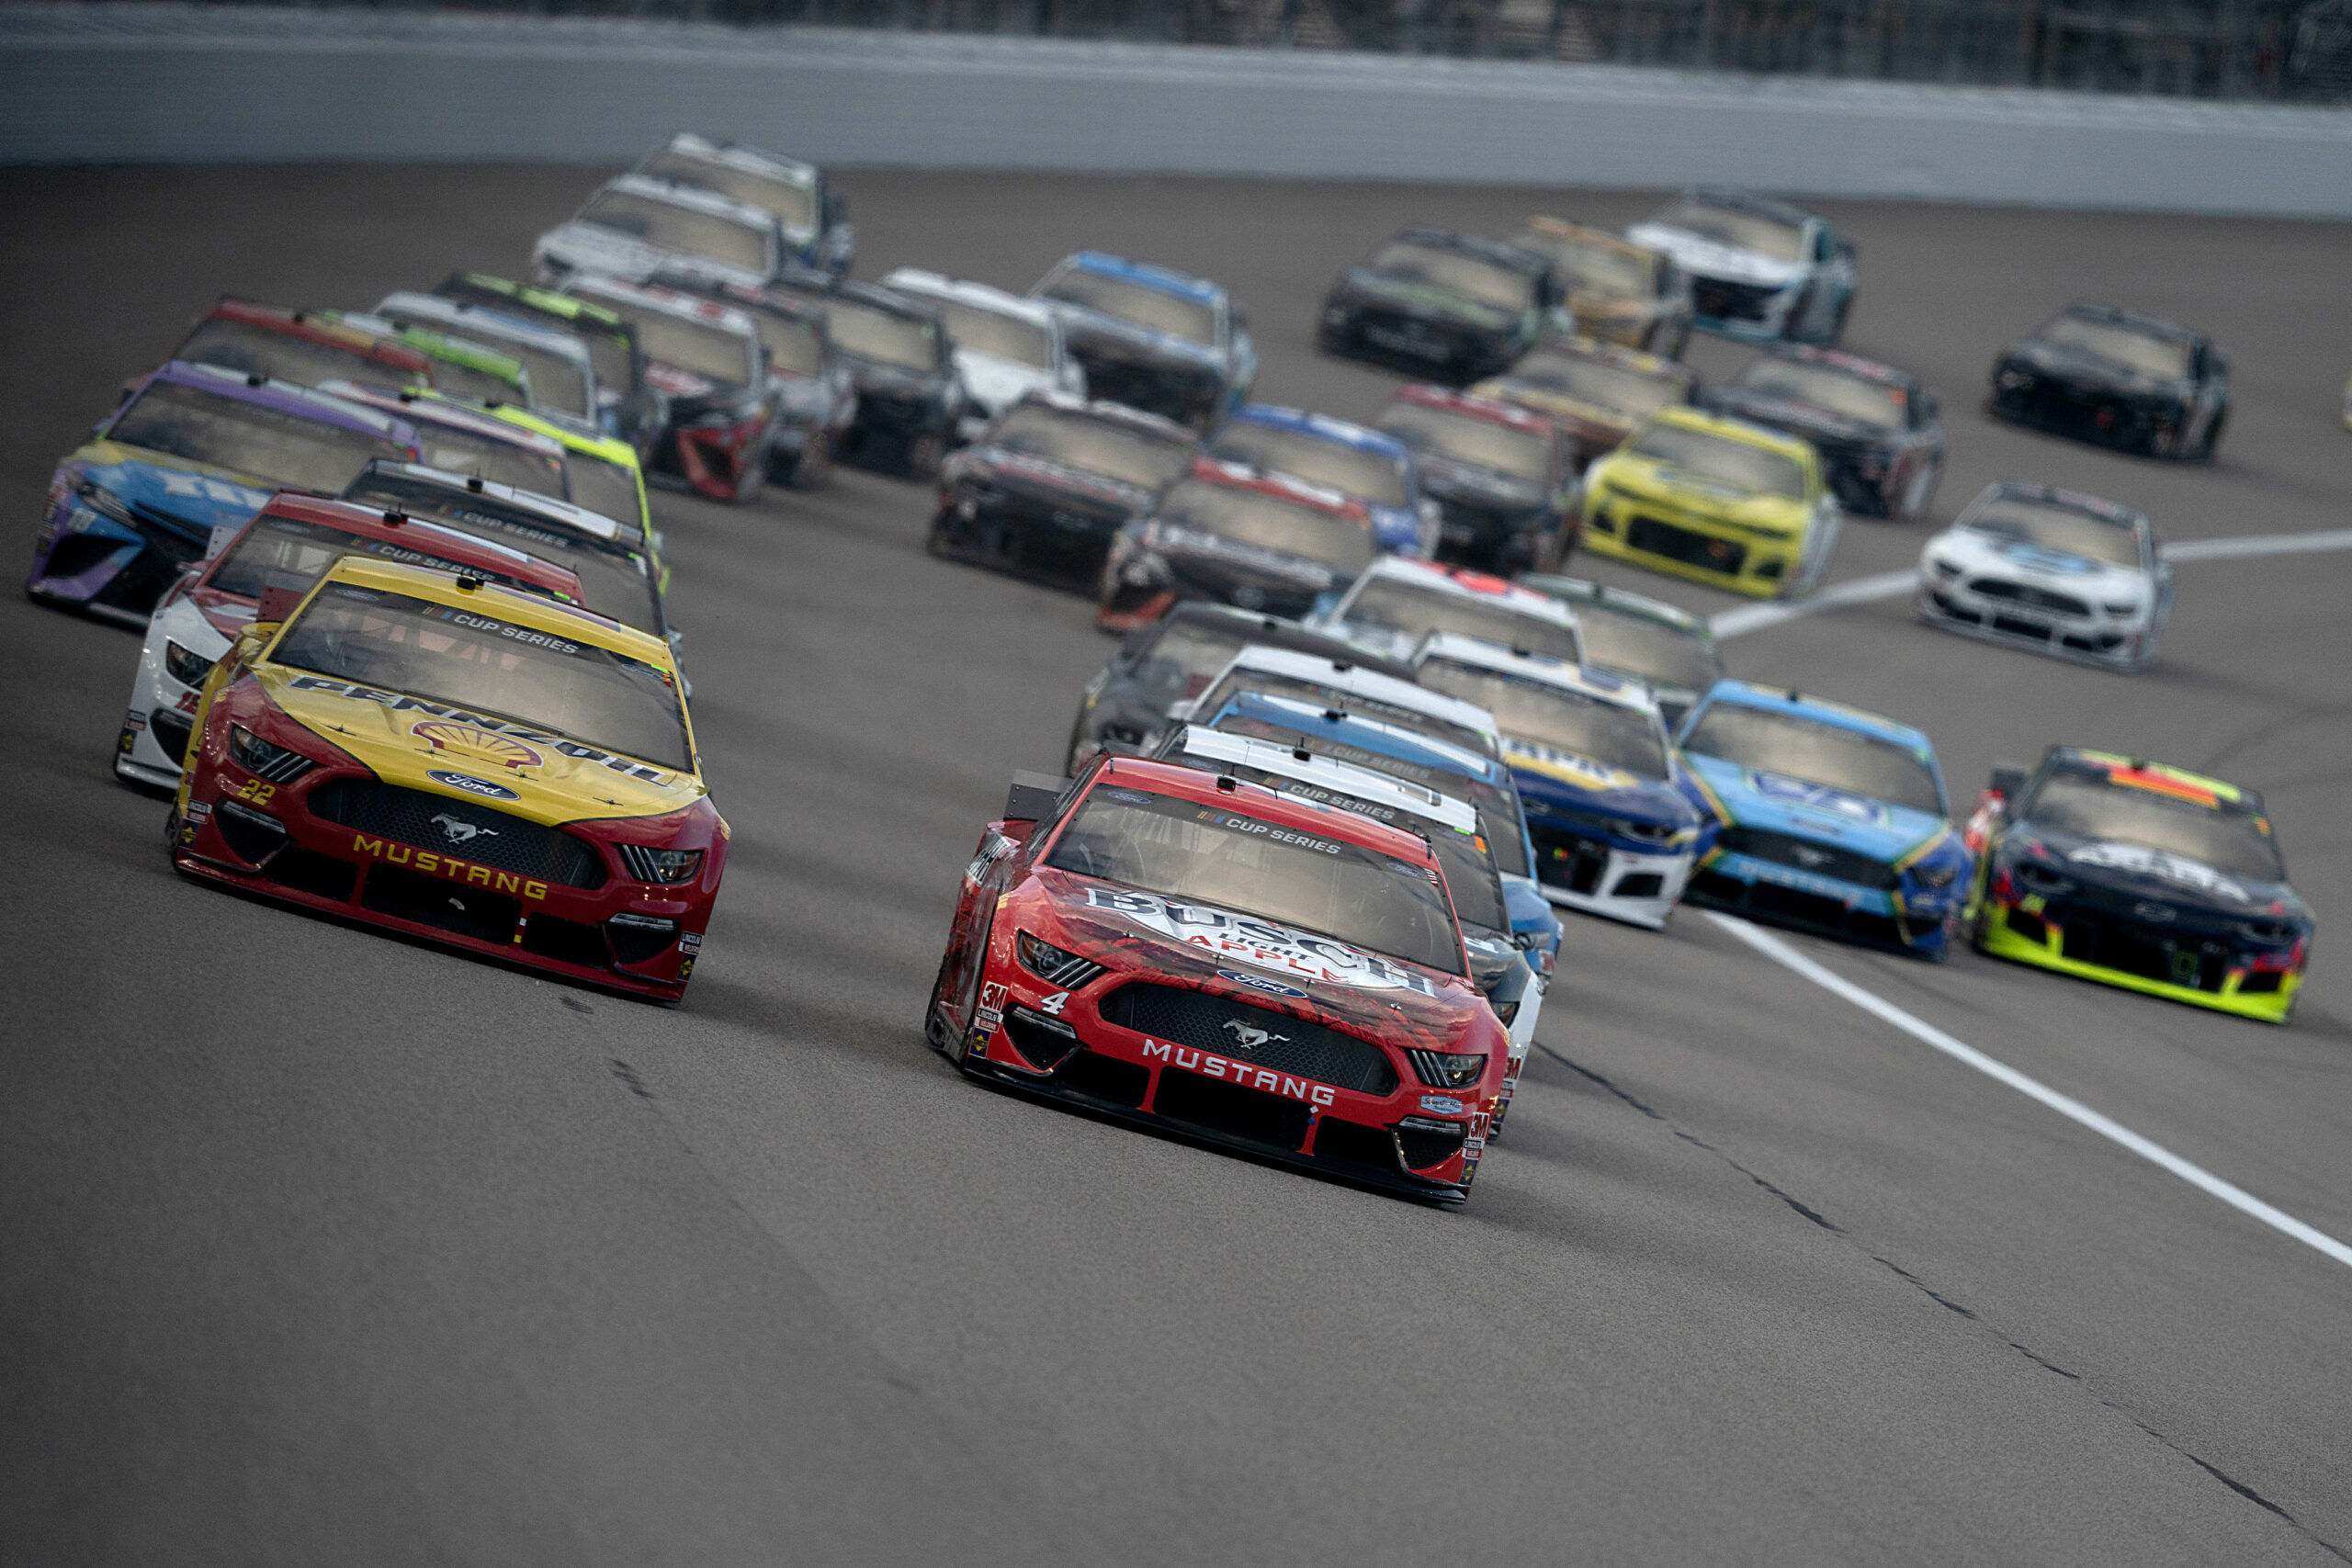 In the meantime, will today's Hollywood Casino 400 live up as the latest exciting NASCAR Playoffs race? (Photo Credit: Kyle Rivas/Getty Images)